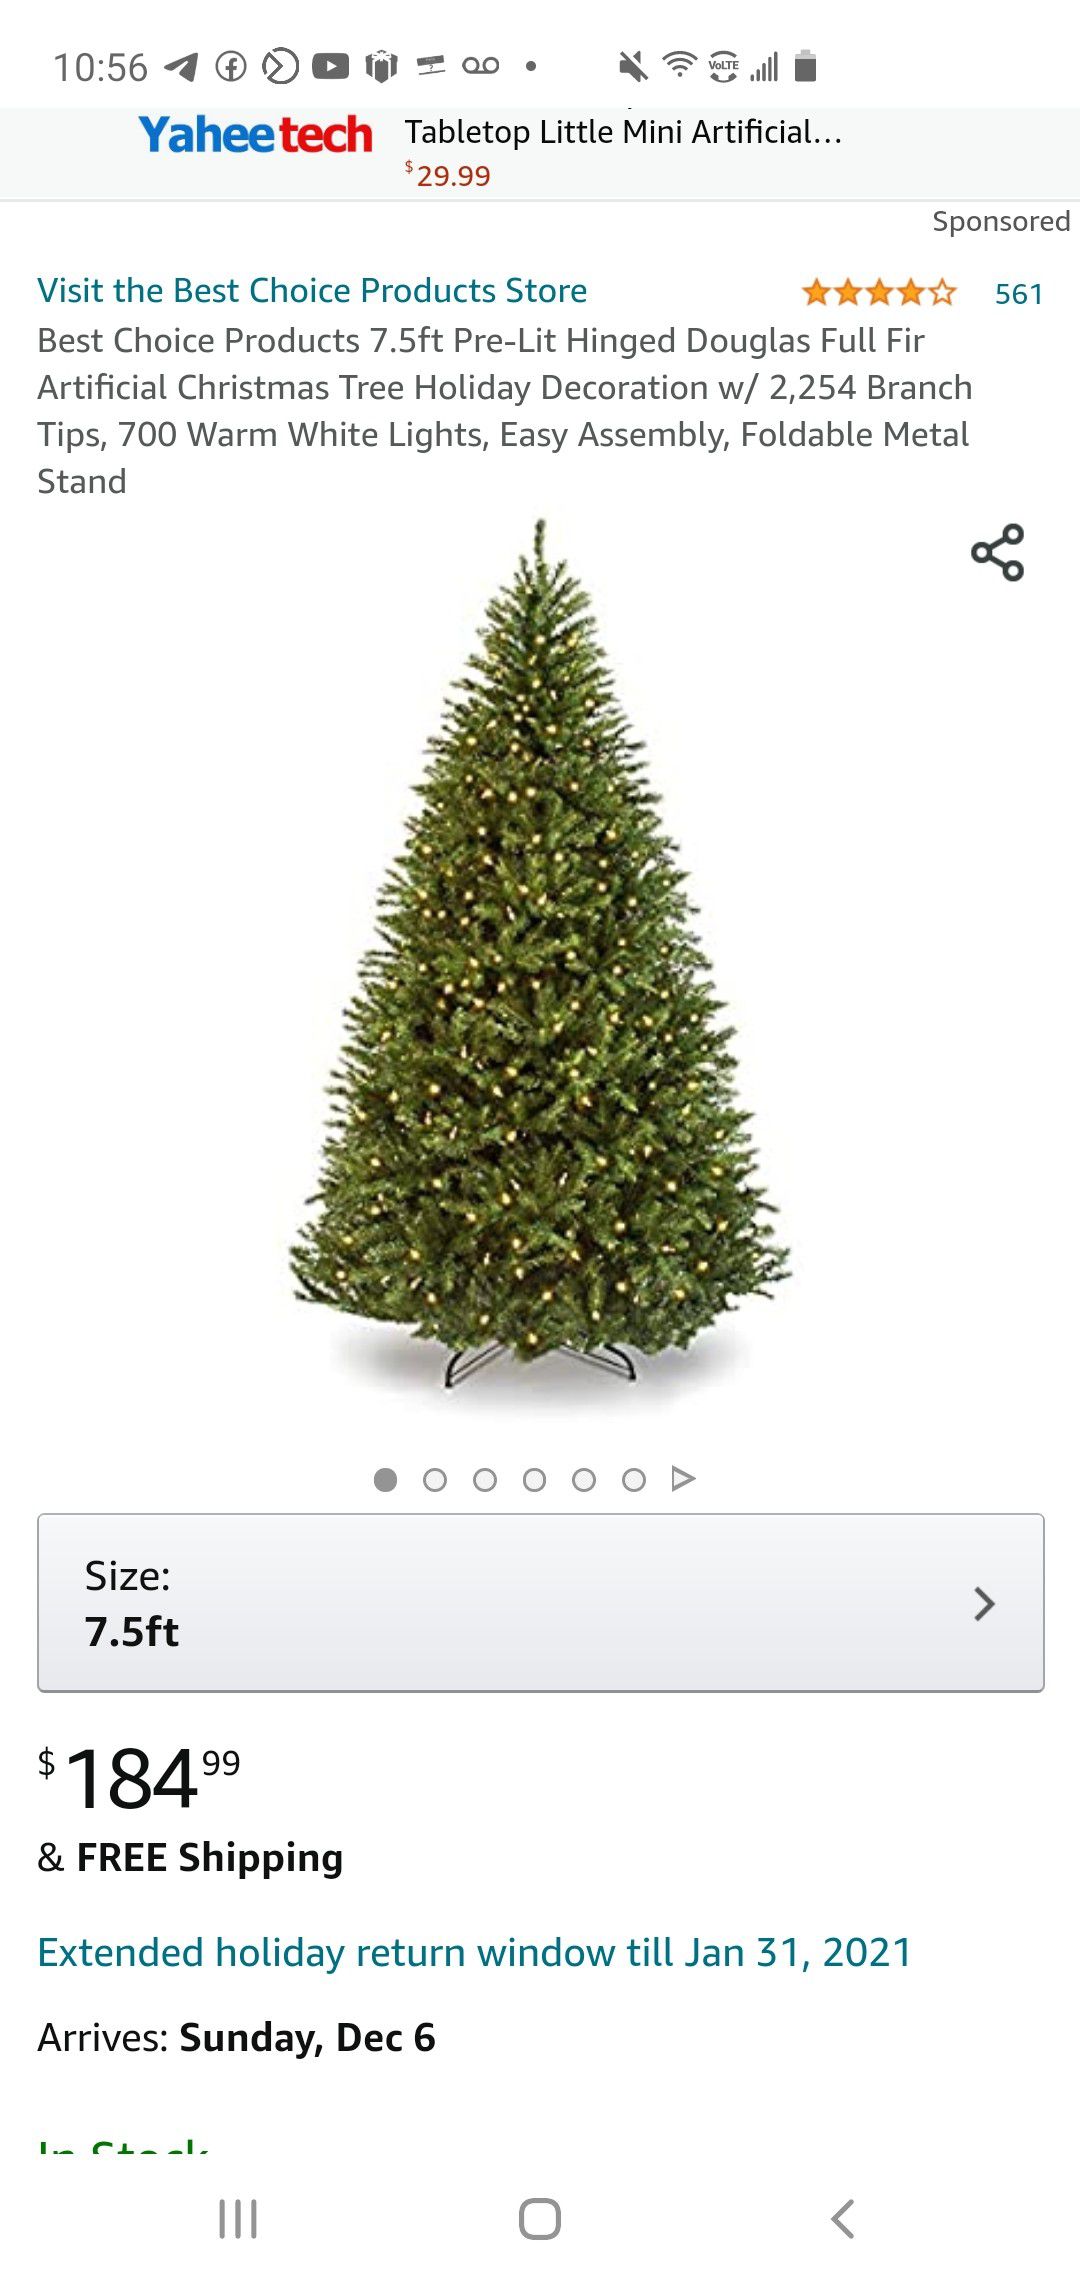 Best Choice Products 7.5ft Pre-Lit Hinged Douglas Full Fir Artificial Christmas Tree Holiday Decoration w/ 2,254 Branch Tips, 700